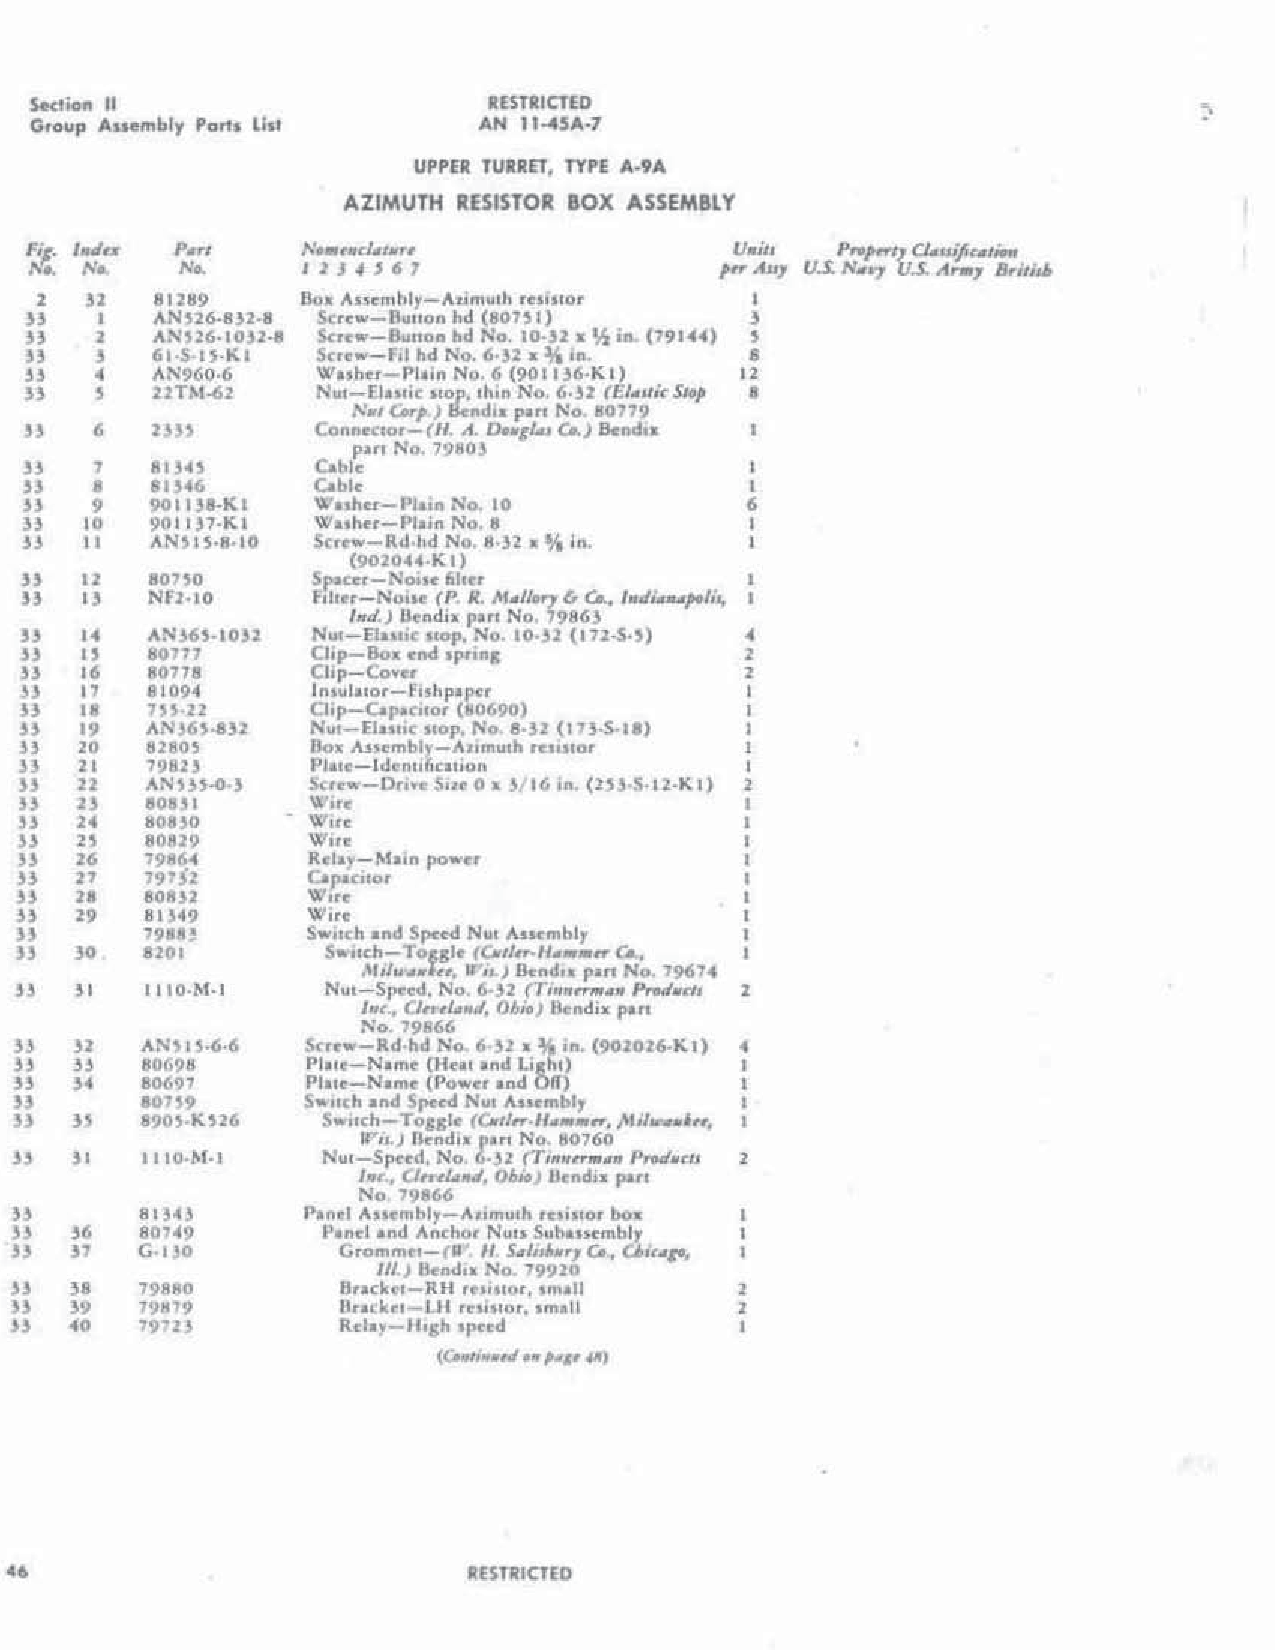 Sample page 48 from AirCorps Library document: Turret Parts Catalog - Army A-9A, Navy 250CE-3